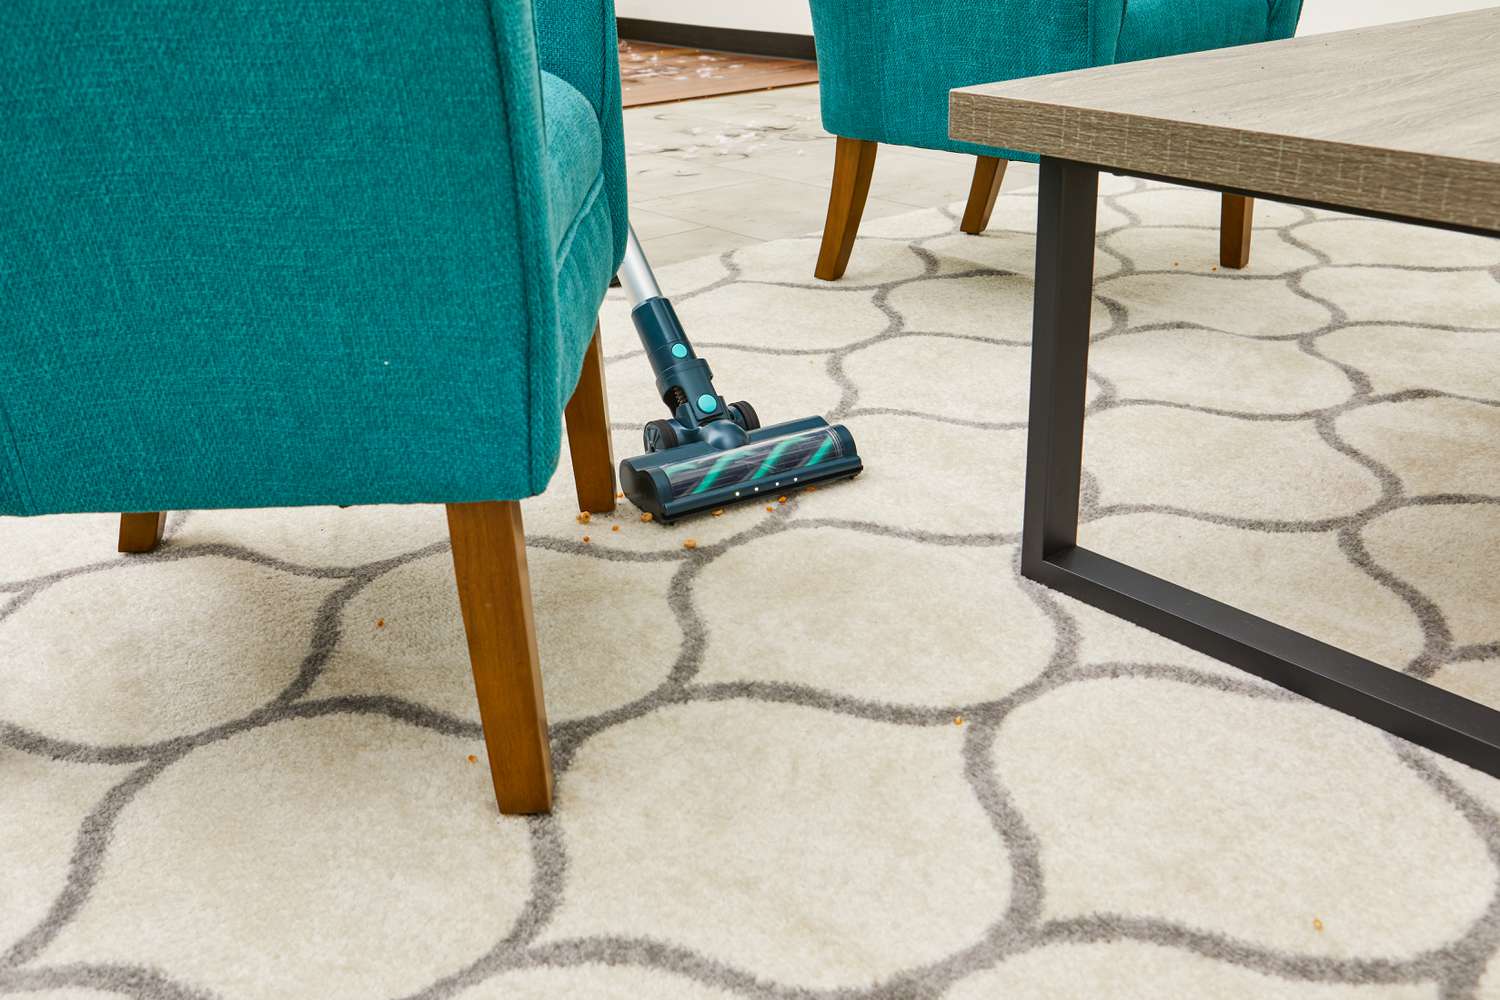 The Belife V12 Cordless Vacuum Cleaner being used to vacuum around the legs of a chair.